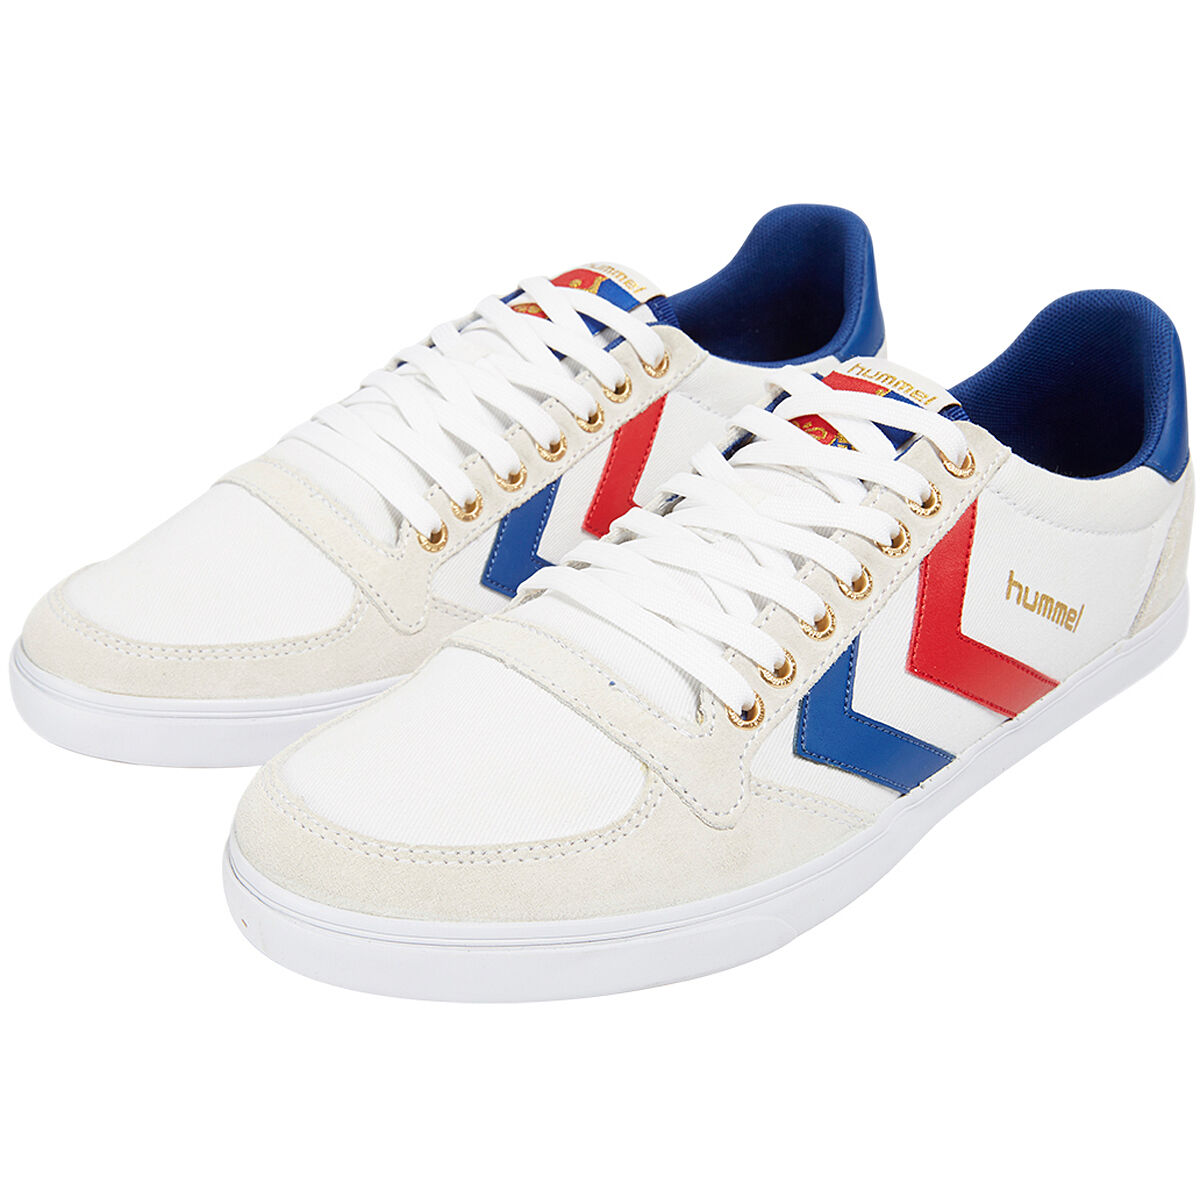 Hummel stripped sneakers | Multicolor